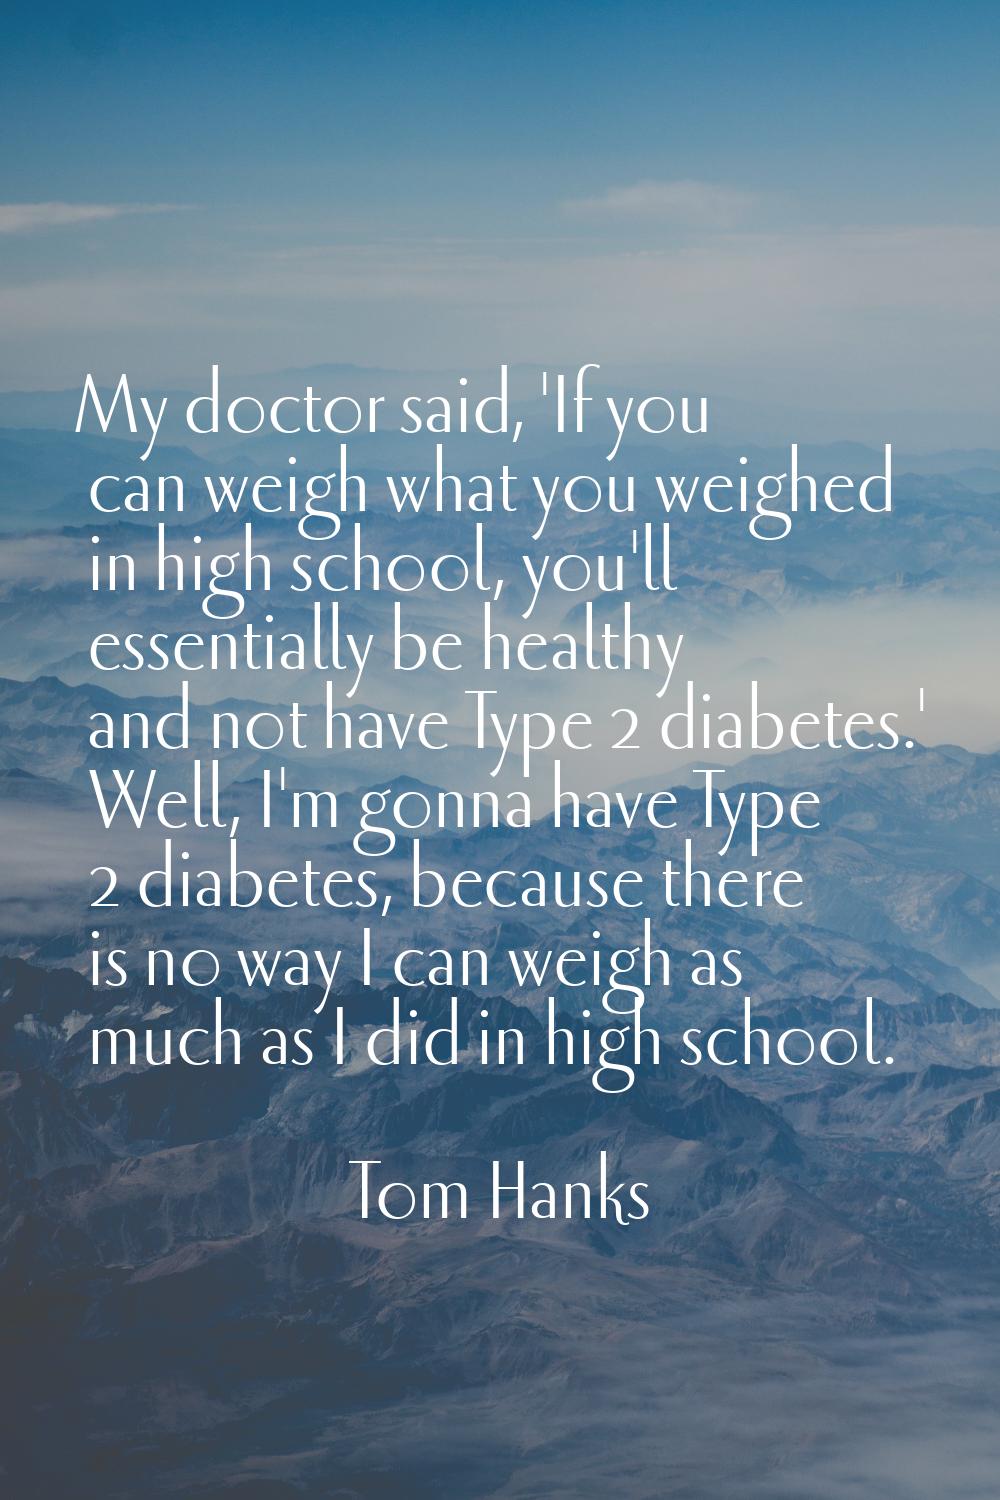 My doctor said, 'If you can weigh what you weighed in high school, you'll essentially be healthy an